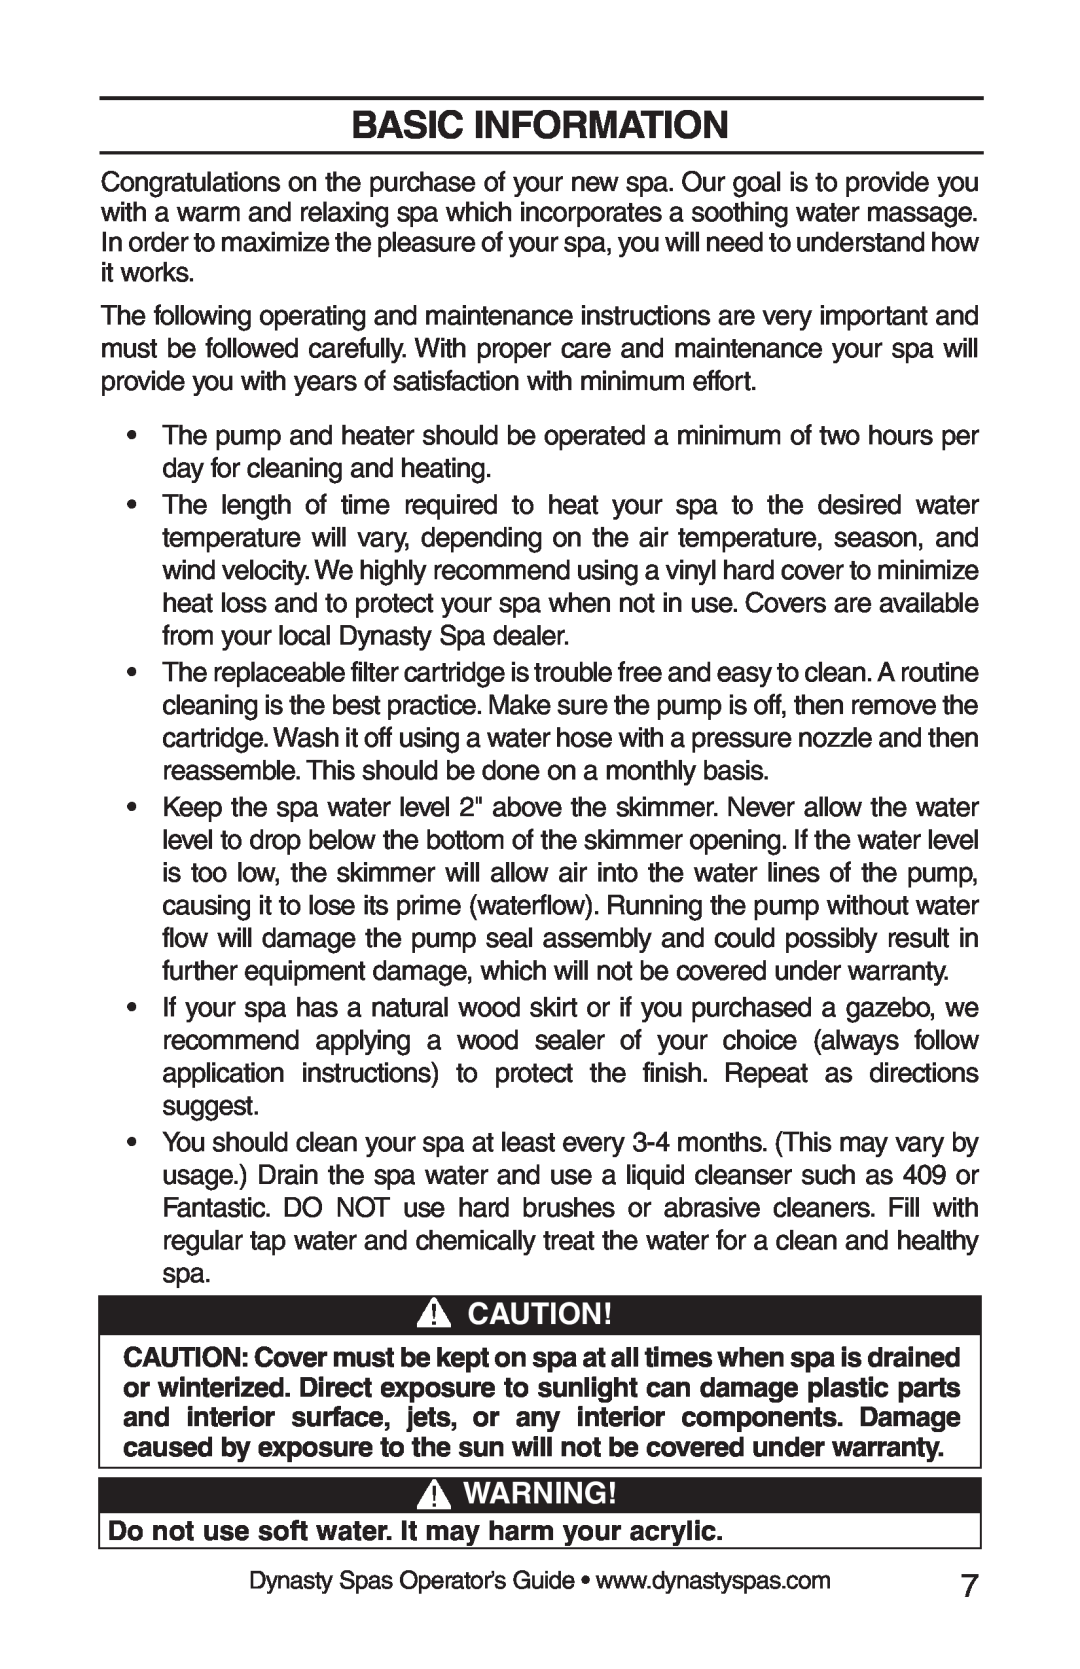 Dynasty Spas 2008 manual Basic Information, Do not use soft water. It may harm your acrylic 